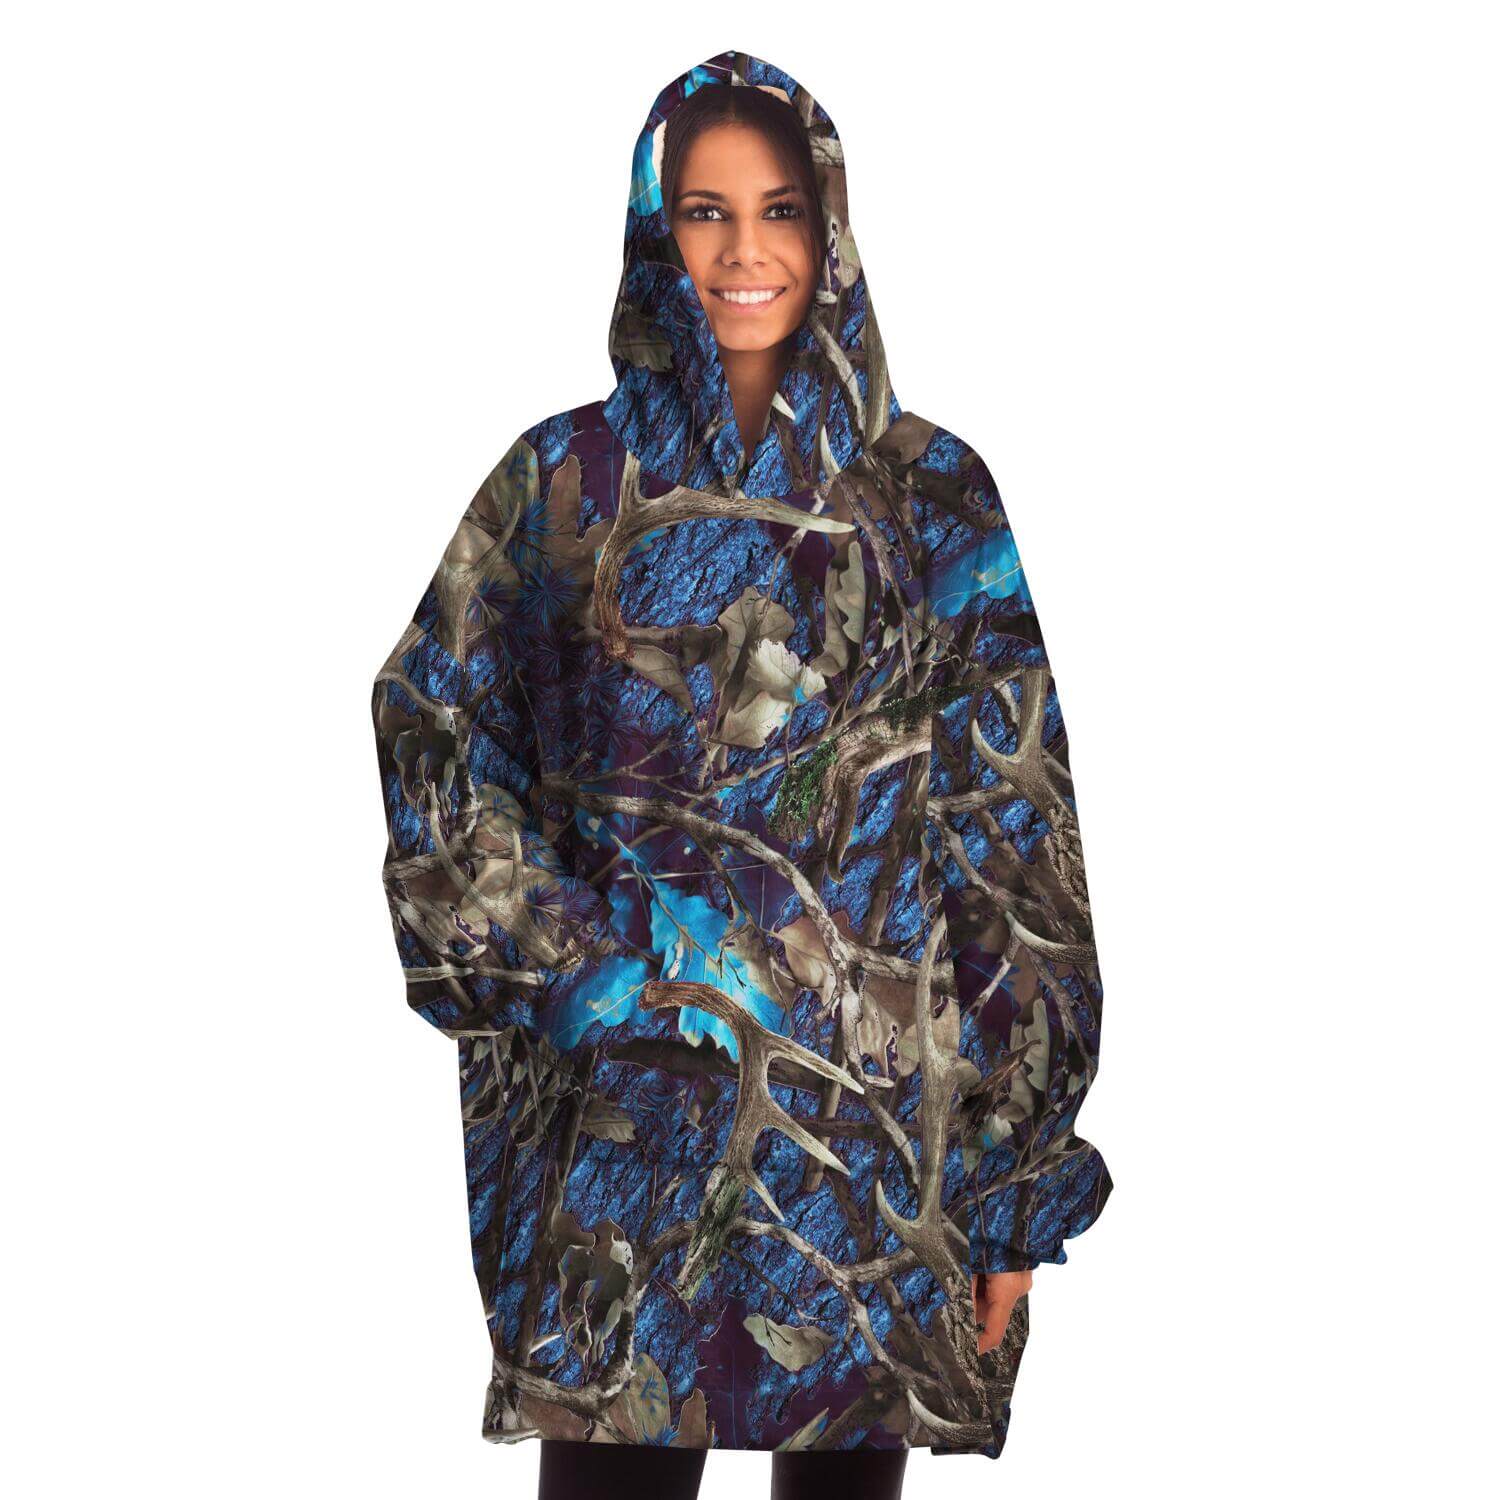 Snug Hoodie - Turquoise Hunting Camouflage - female - front